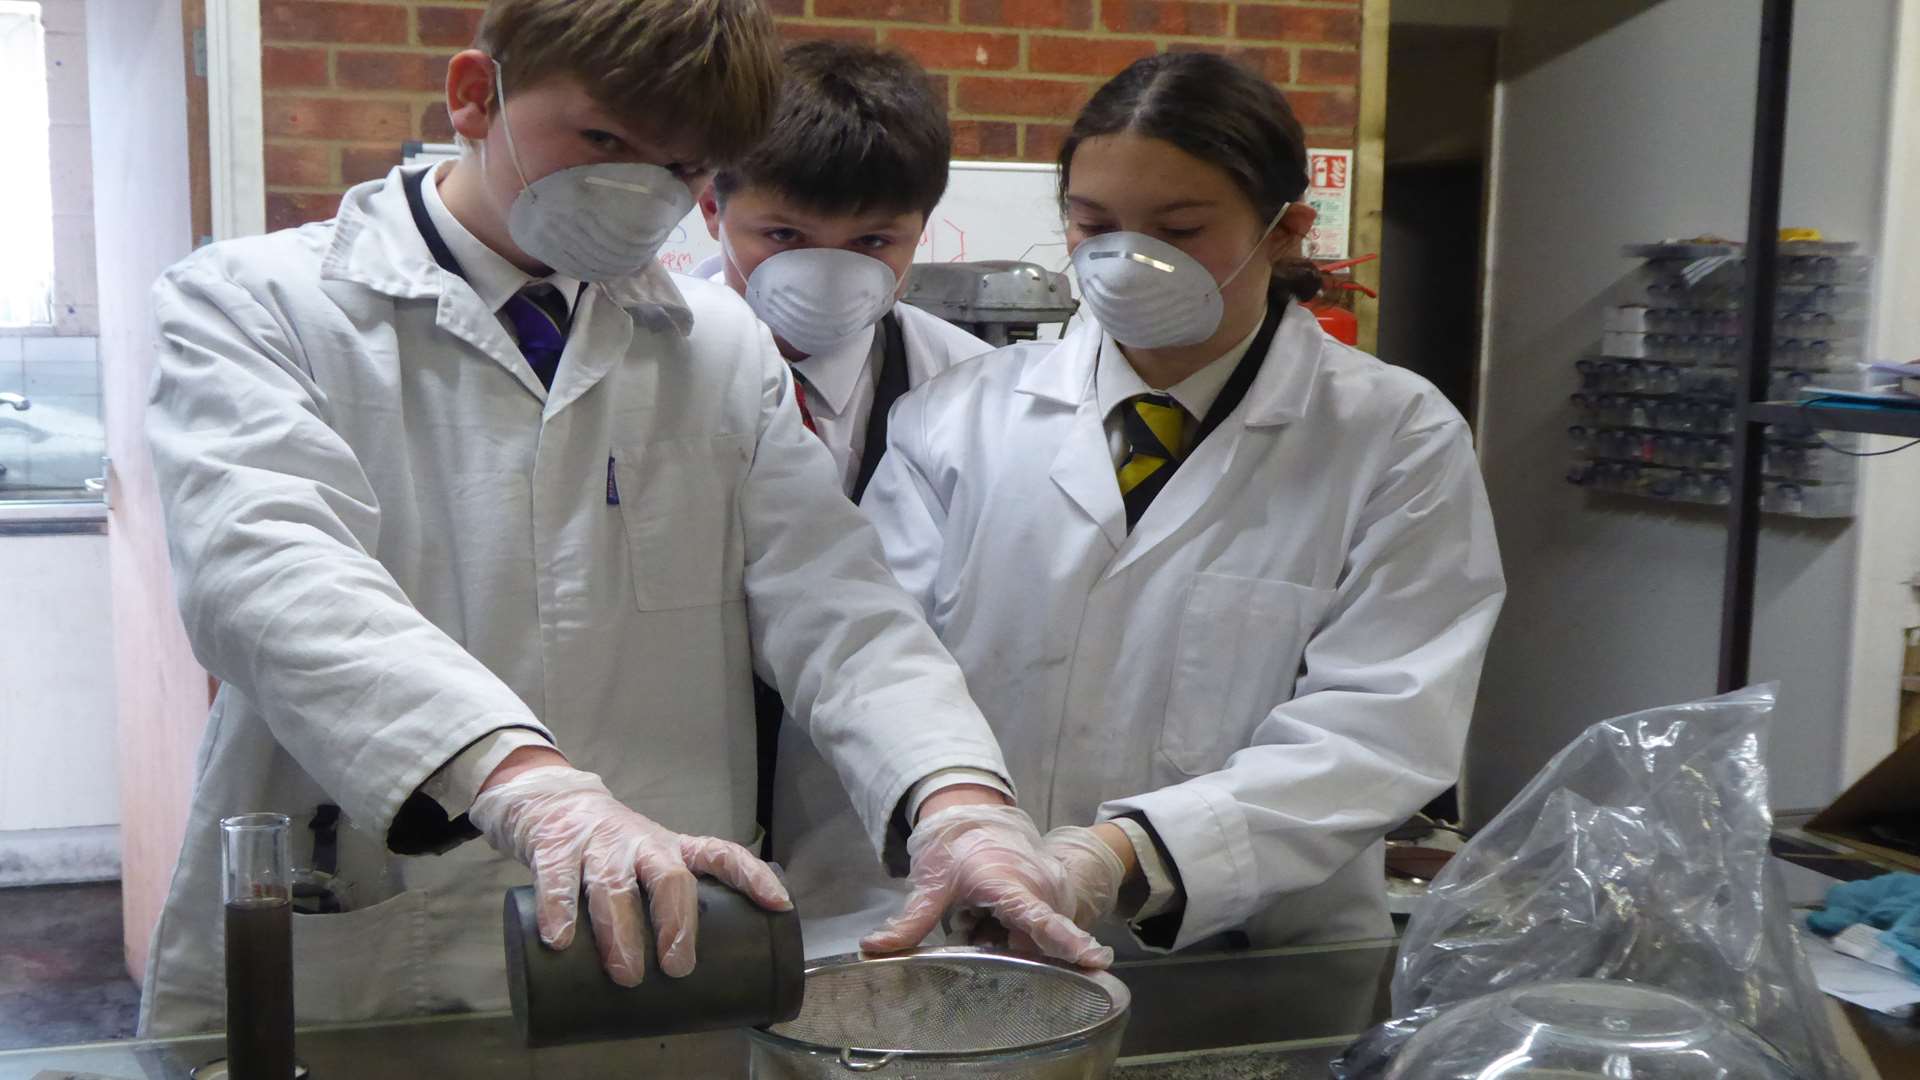 The Graphene Water Filter team from Canterbury High School will be taking part in the KM Bright Spark Awards. Left to right: Auryn Memmott, Jack Wimble-Roberts and Alice Shaw.